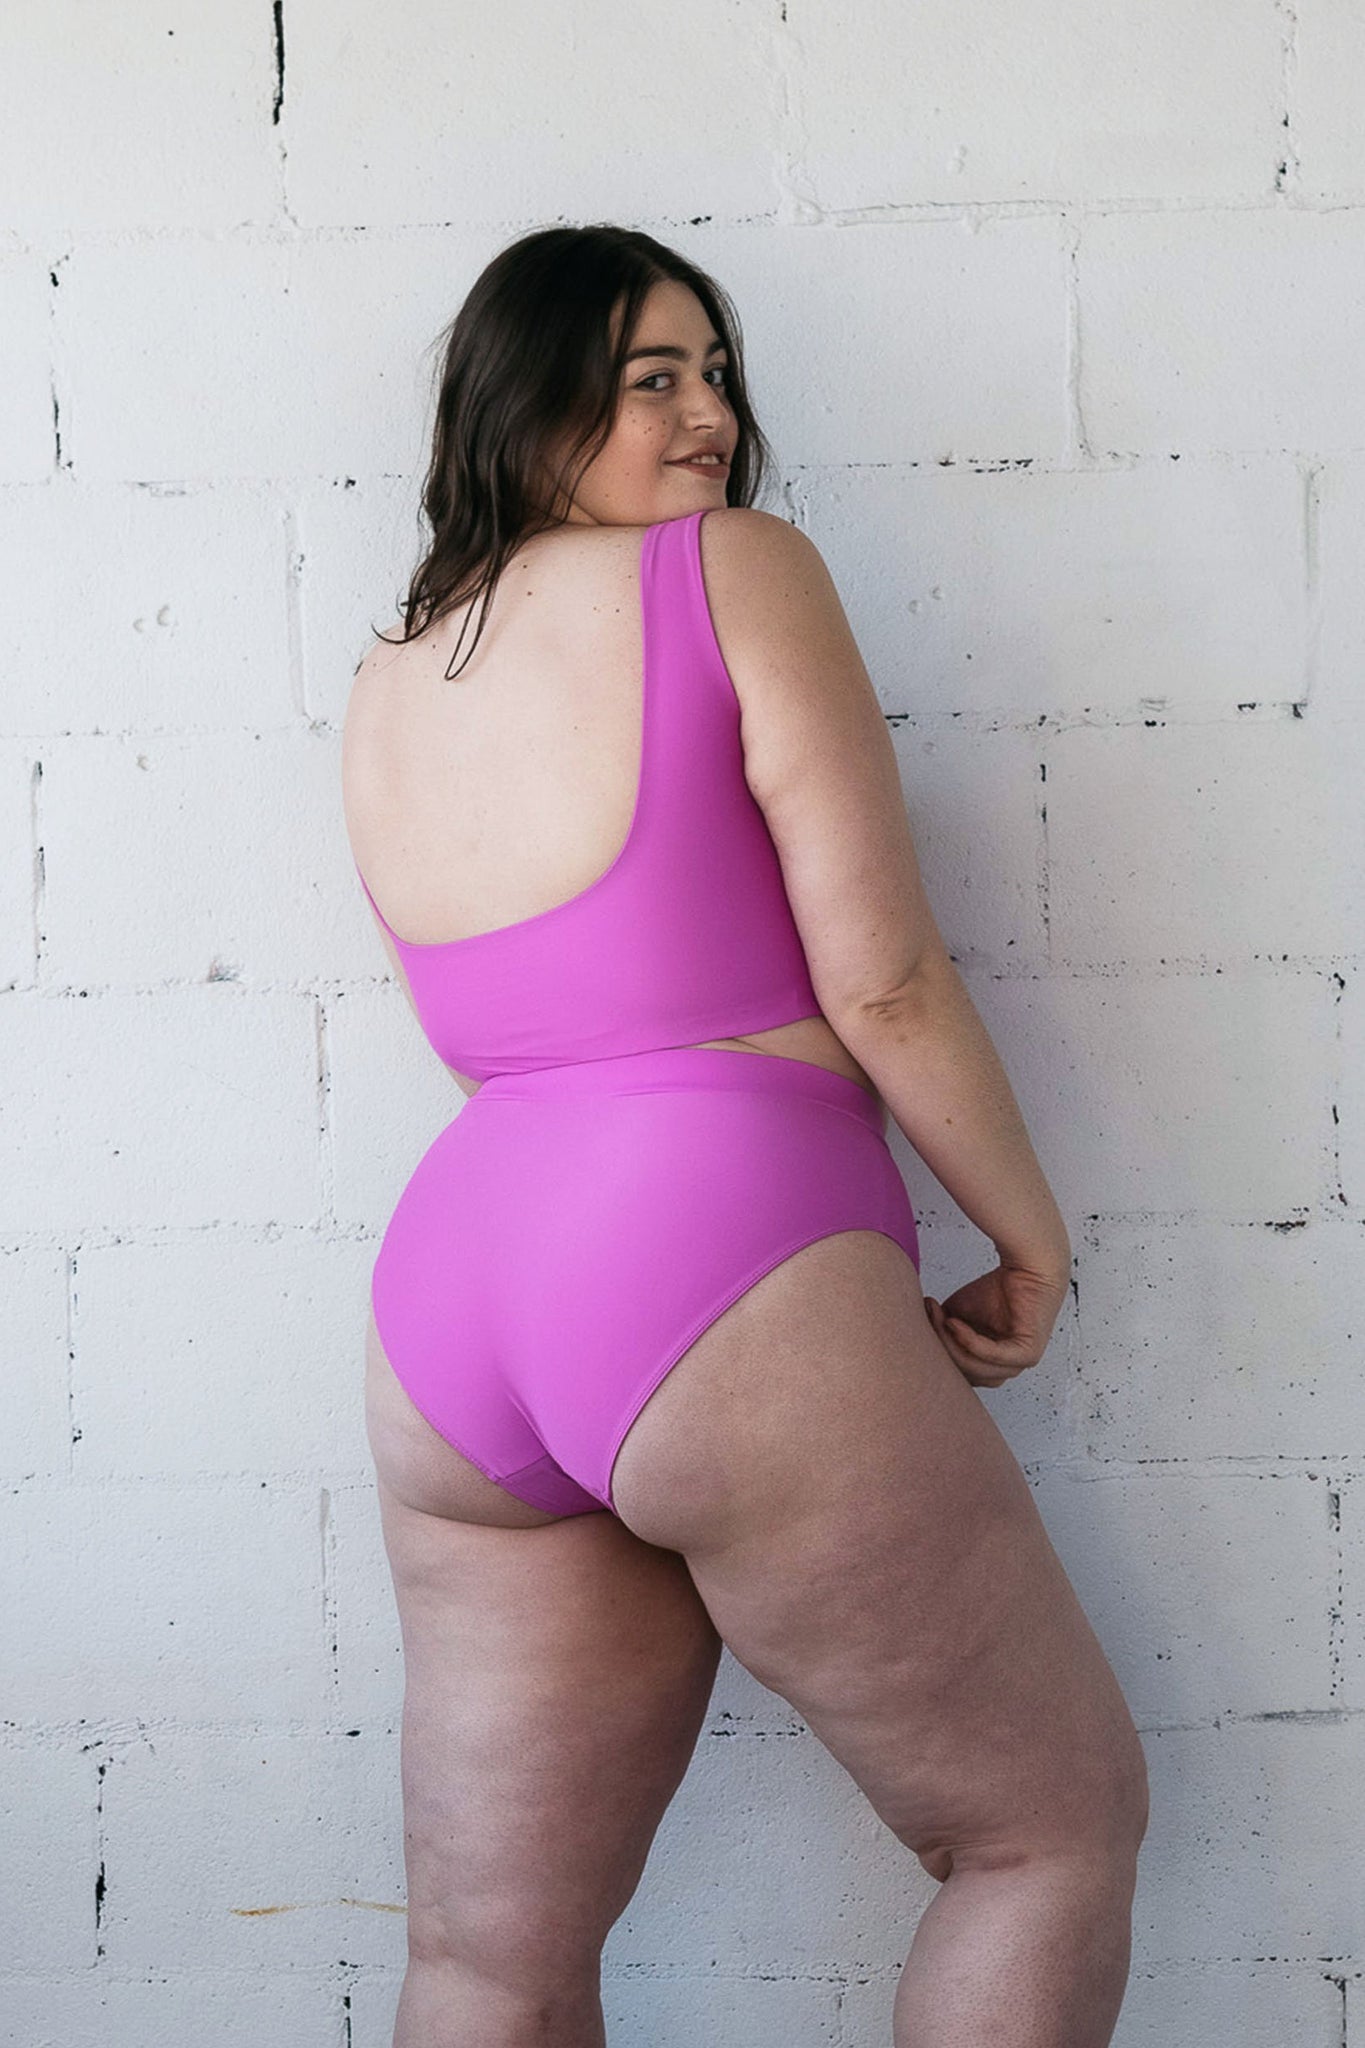 The back of a woman smiling looking over her shoulder wearing bright orchid high waisted bikini bottoms with full coverage and a matching bright orchid bikini top.